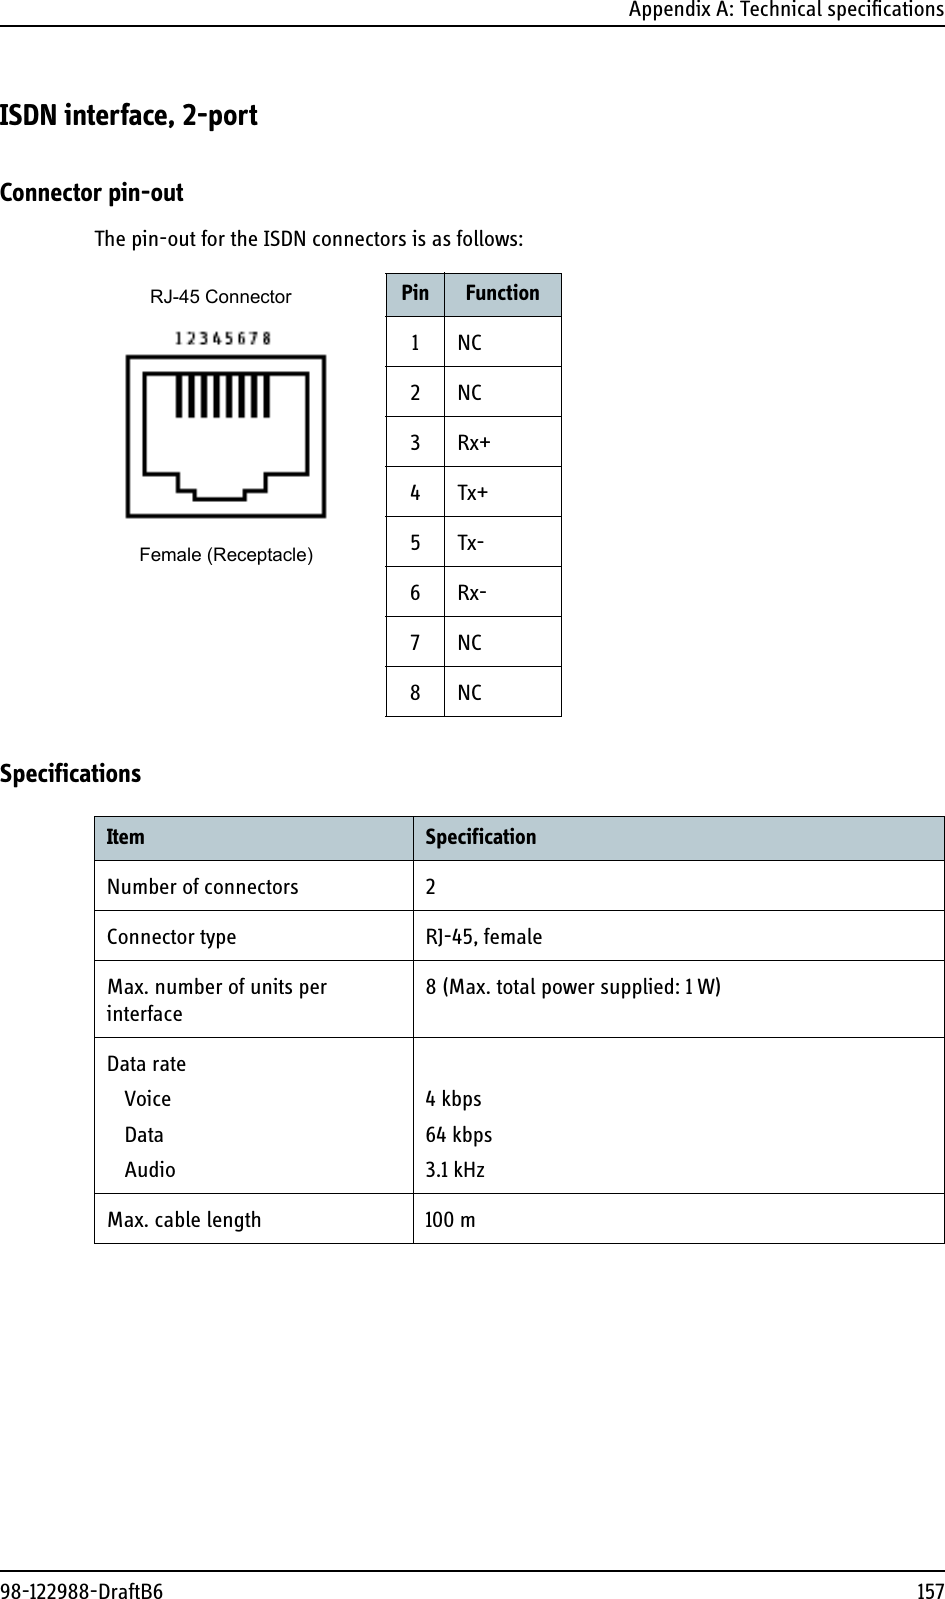 Appendix A: Technical specifications98-122988-DraftB6 157ISDN interface, 2-portConnector pin-outThe pin-out for the ISDN connectors is as follows:SpecificationsPin Function1NC2NC3Rx+4Tx+5Tx-6Rx-7NC8NCRJ-45 ConnectorFemale (Receptacle)Item SpecificationNumber of connectors 2Connector type RJ-45, femaleMax. number of units per interface8 (Max. total power supplied: 1 W)Data rateVoiceDataAudio4 kbps64 kbps3.1 kHzMax. cable length 100 m